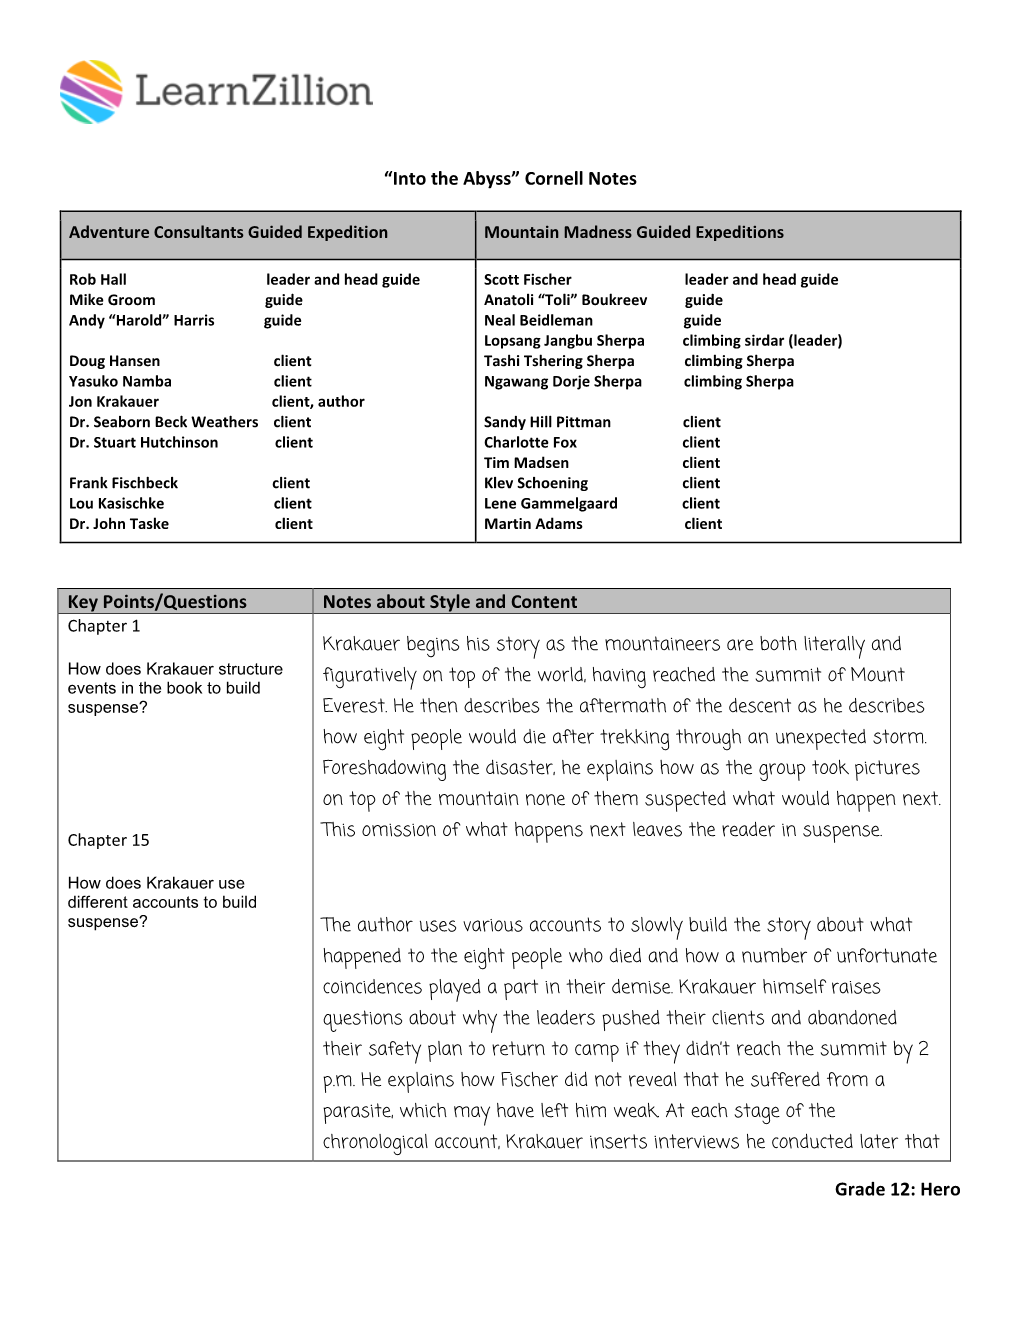 Grade 12: Hero “Into the Abyss” Cornell Notes Key Points/Questions Notes About Style and Content